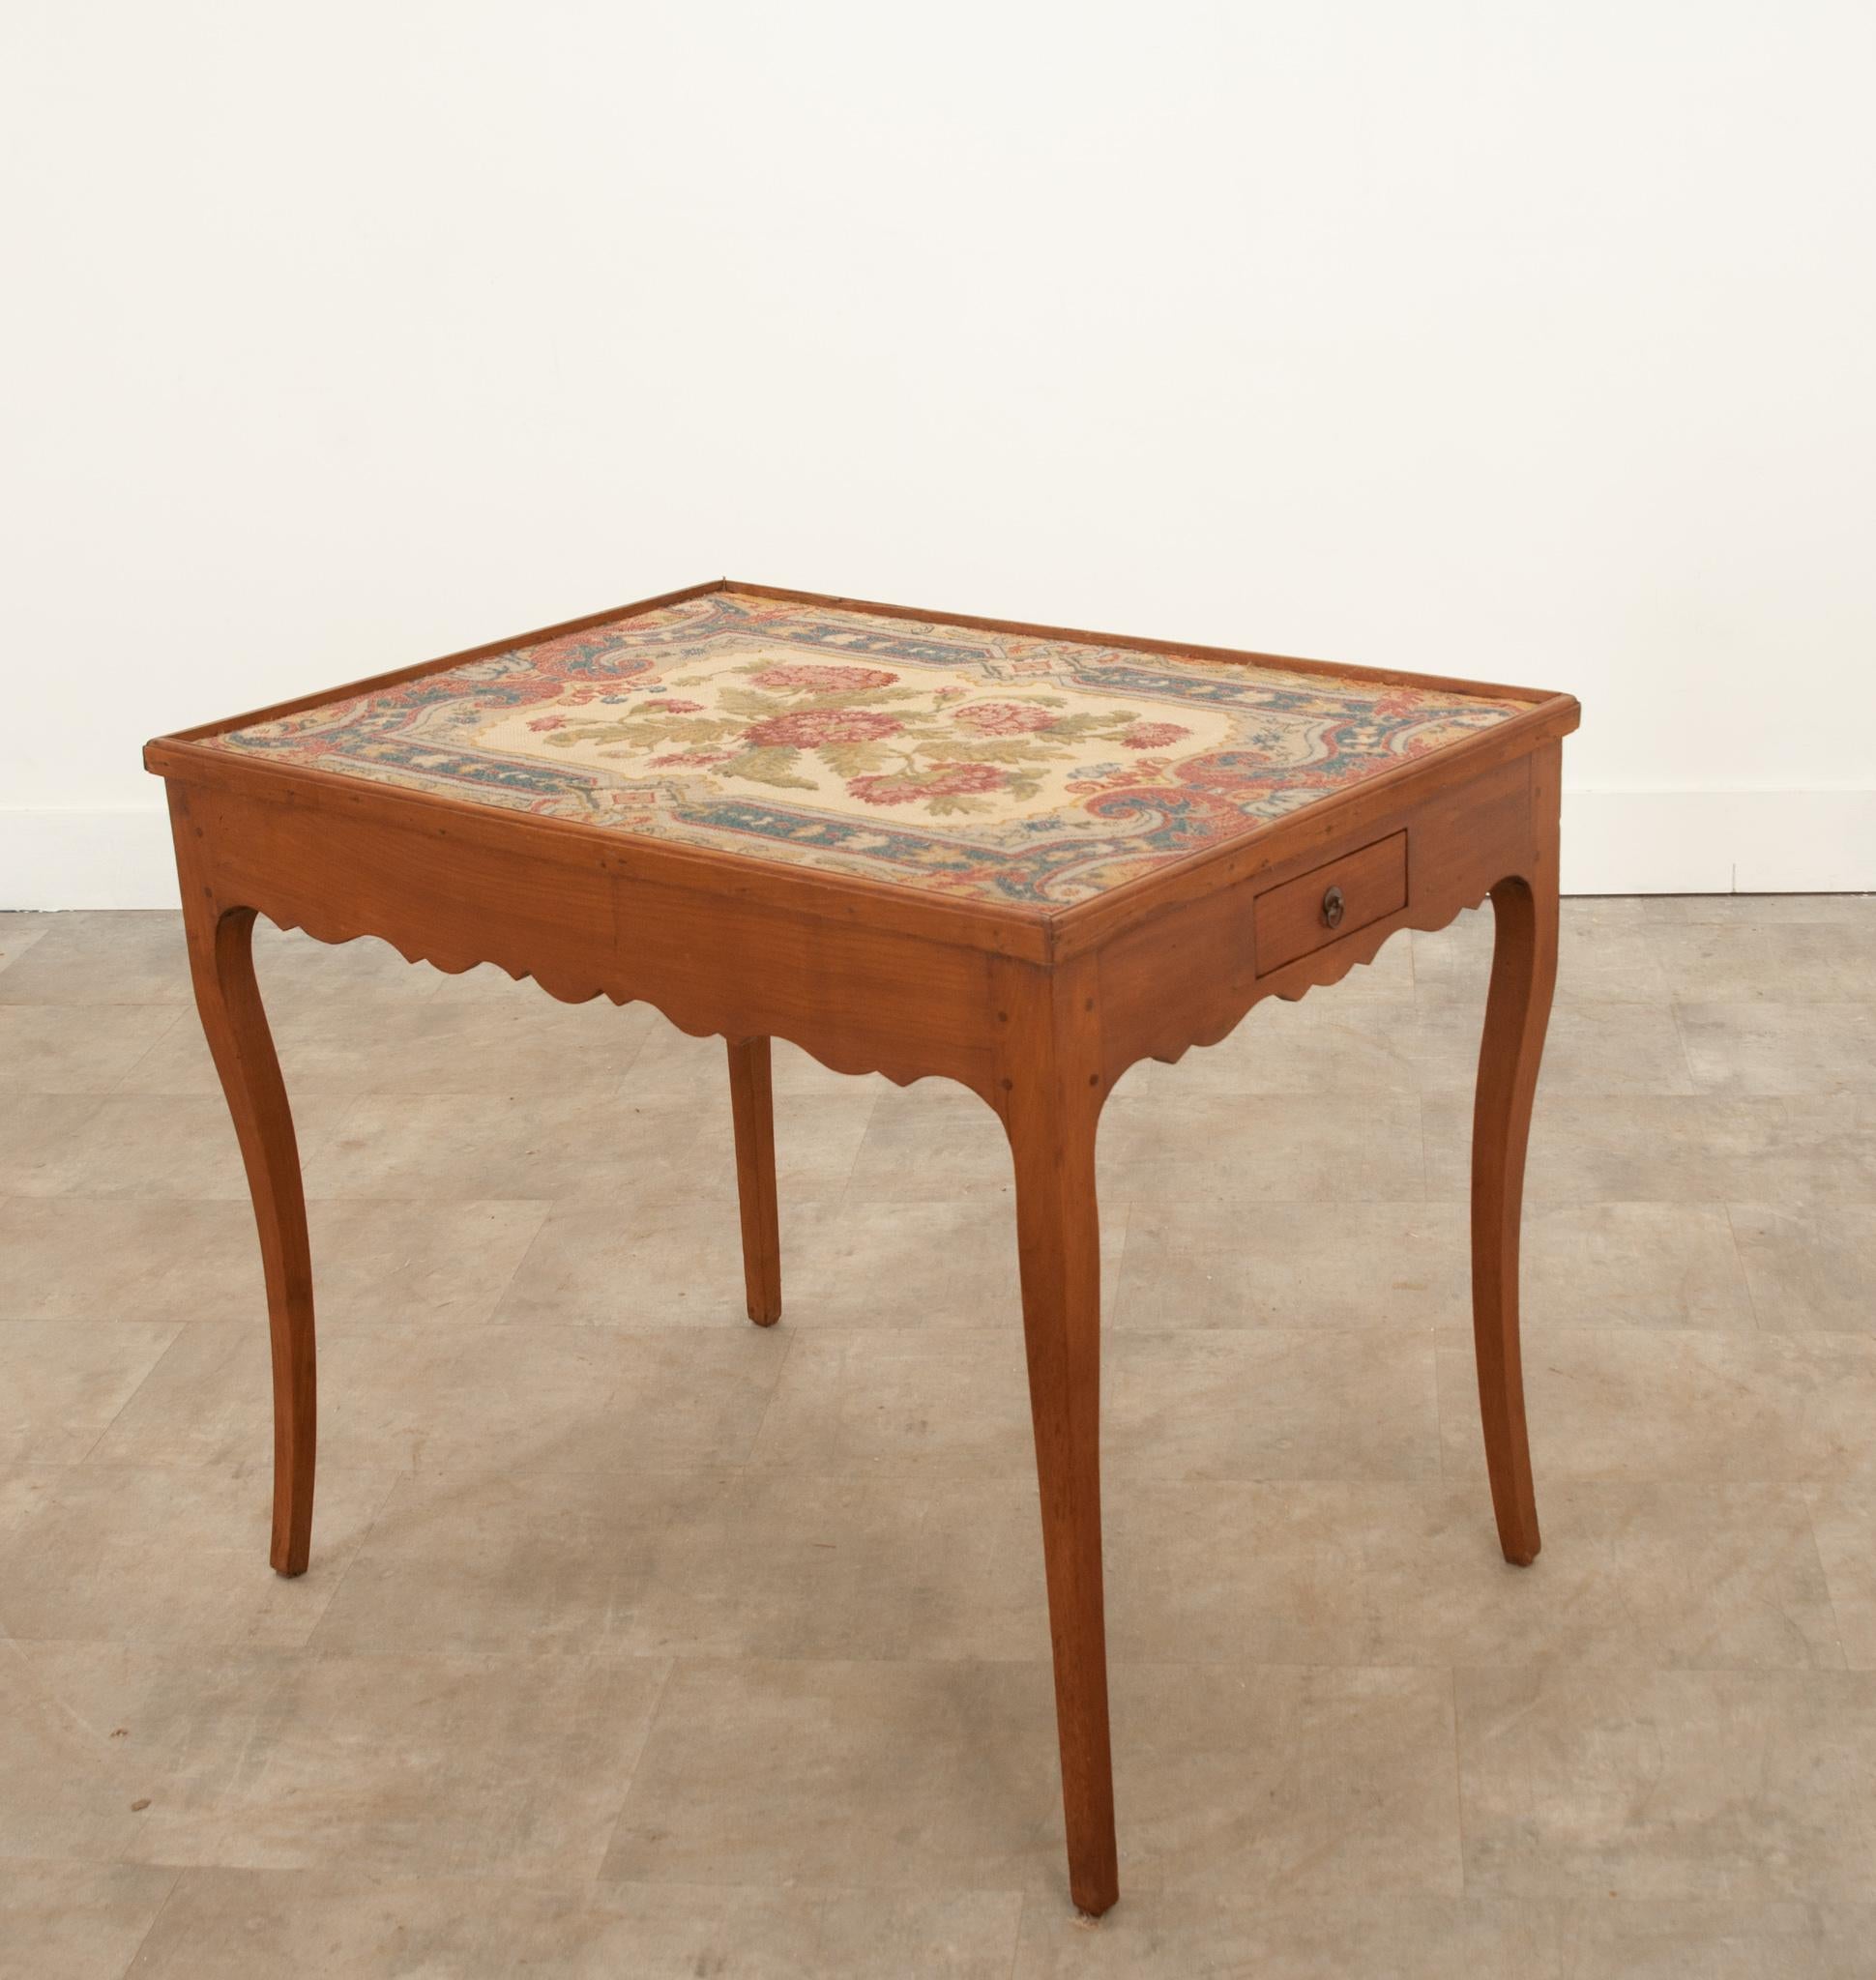 This unique little table is a great way to add color and texture to your space. Crafted in France during the 19th century from solid fruitwood with a needlepoint tapestry top. The textile top is in wonderful antique condition and is a lovely display